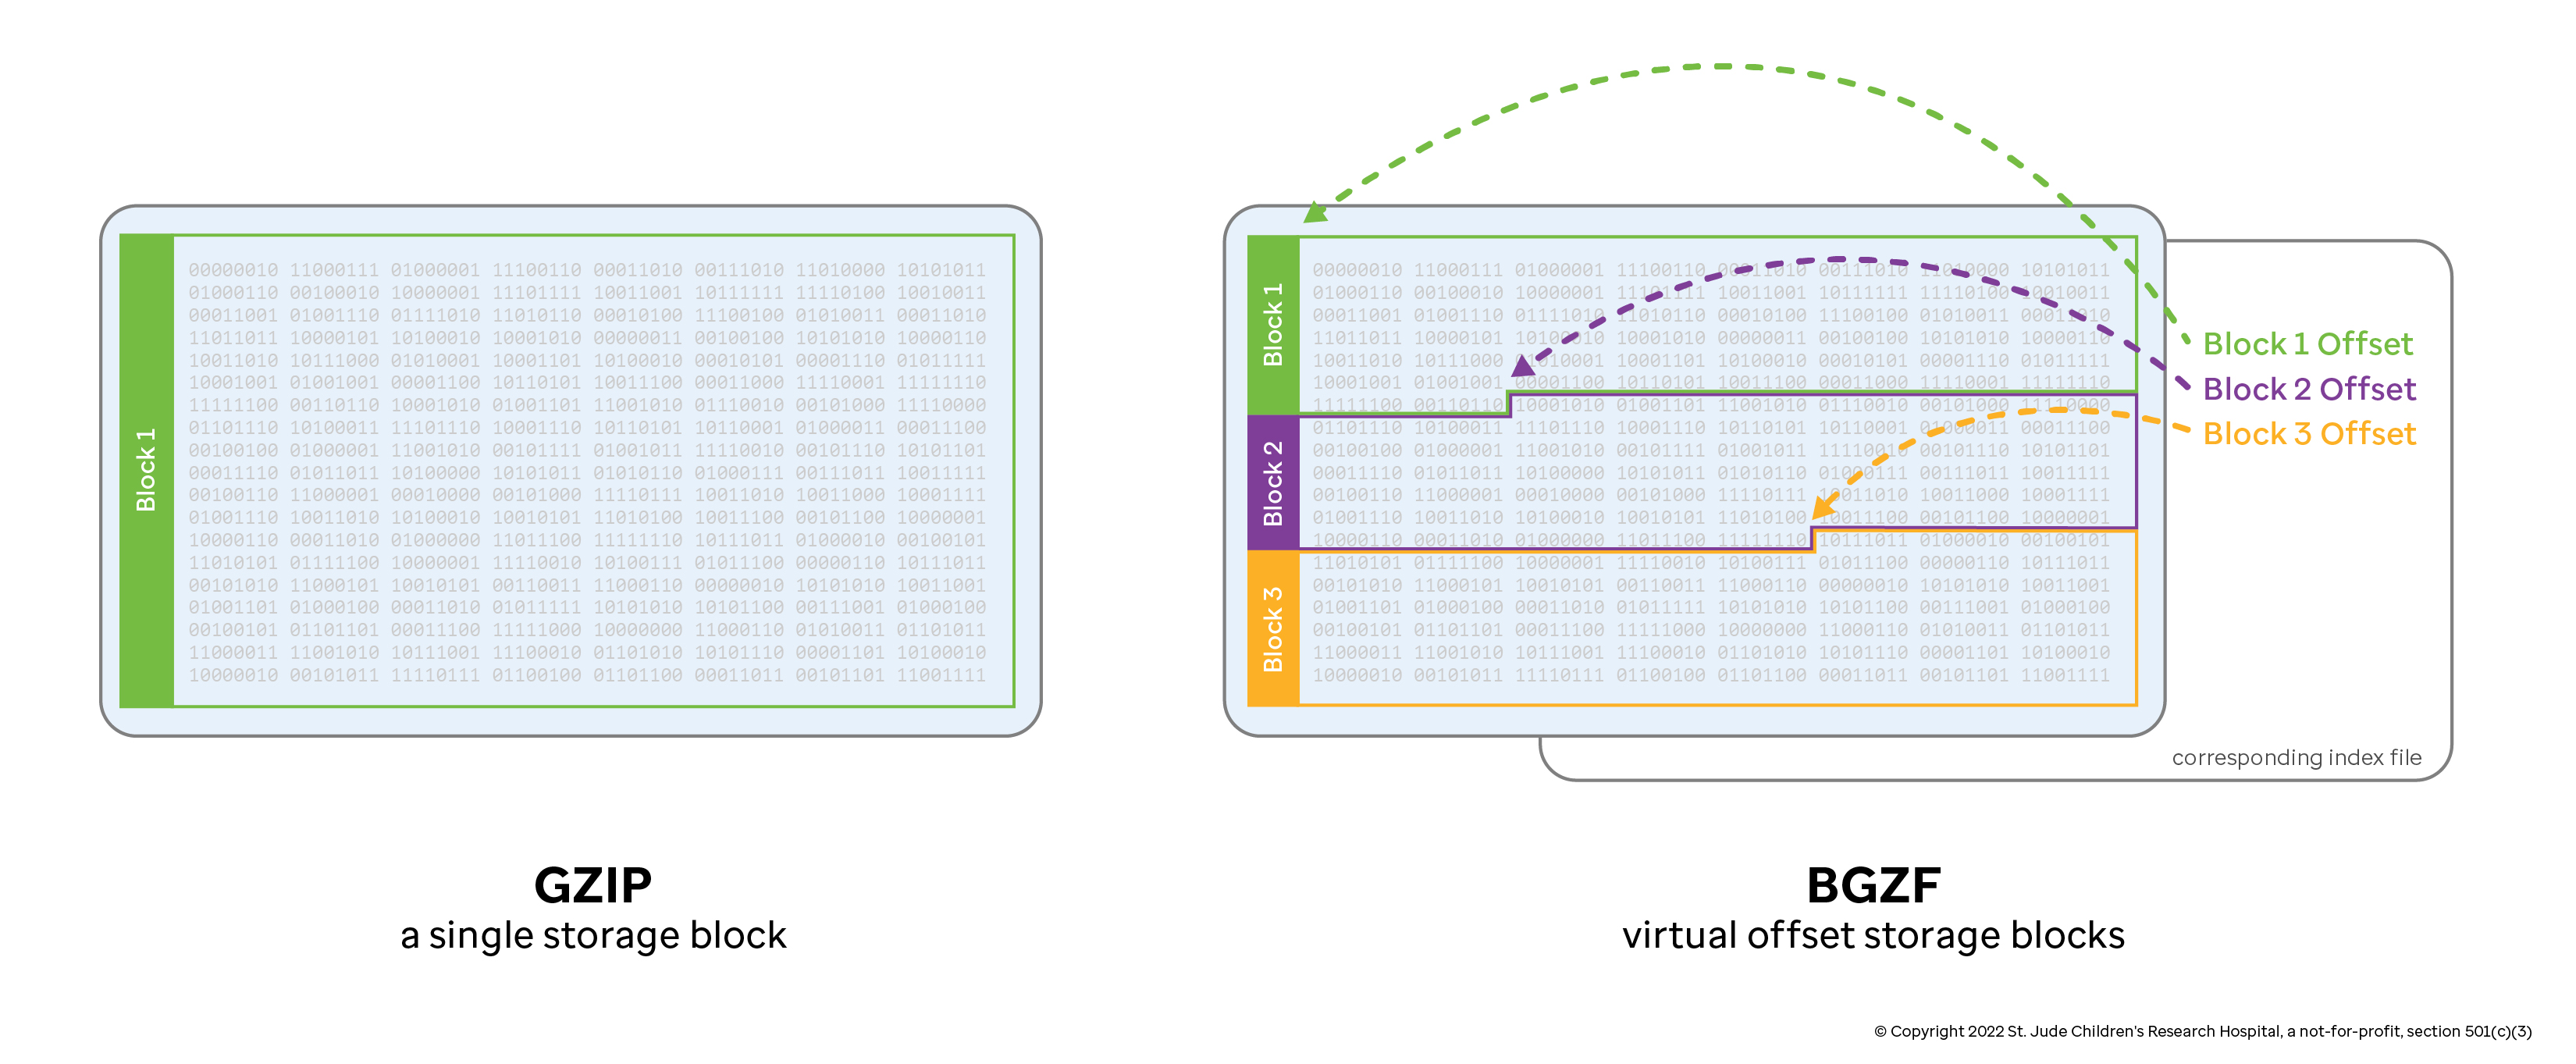 Figure depicting the differences between GZIP and BGZF with multiple GZIP streams (blocks) being included in the BGZF file